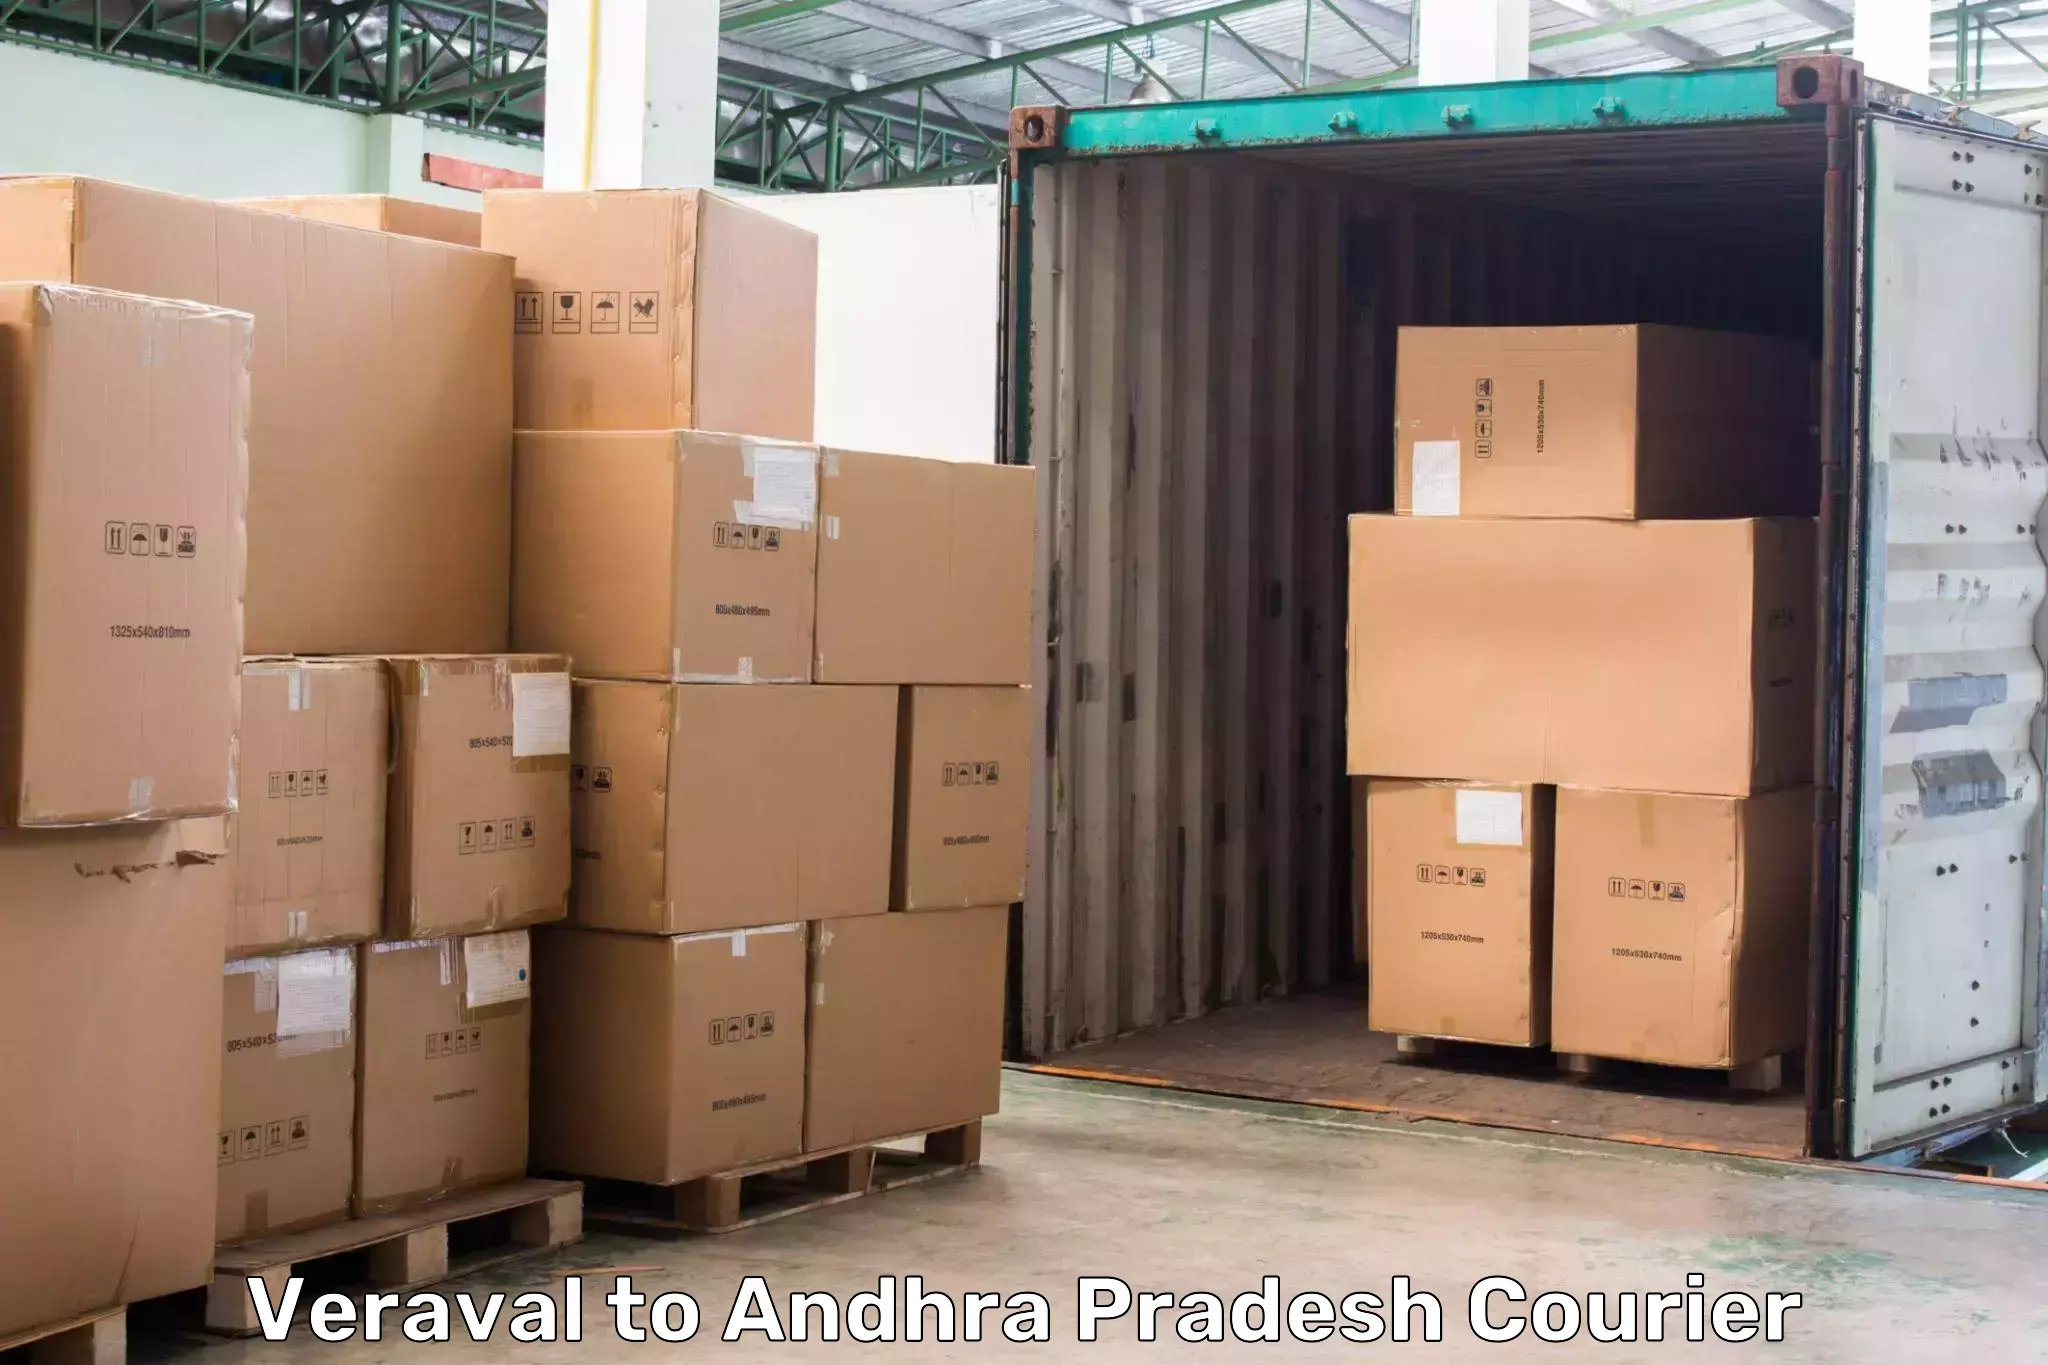 Flexible delivery scheduling Veraval to Nellore